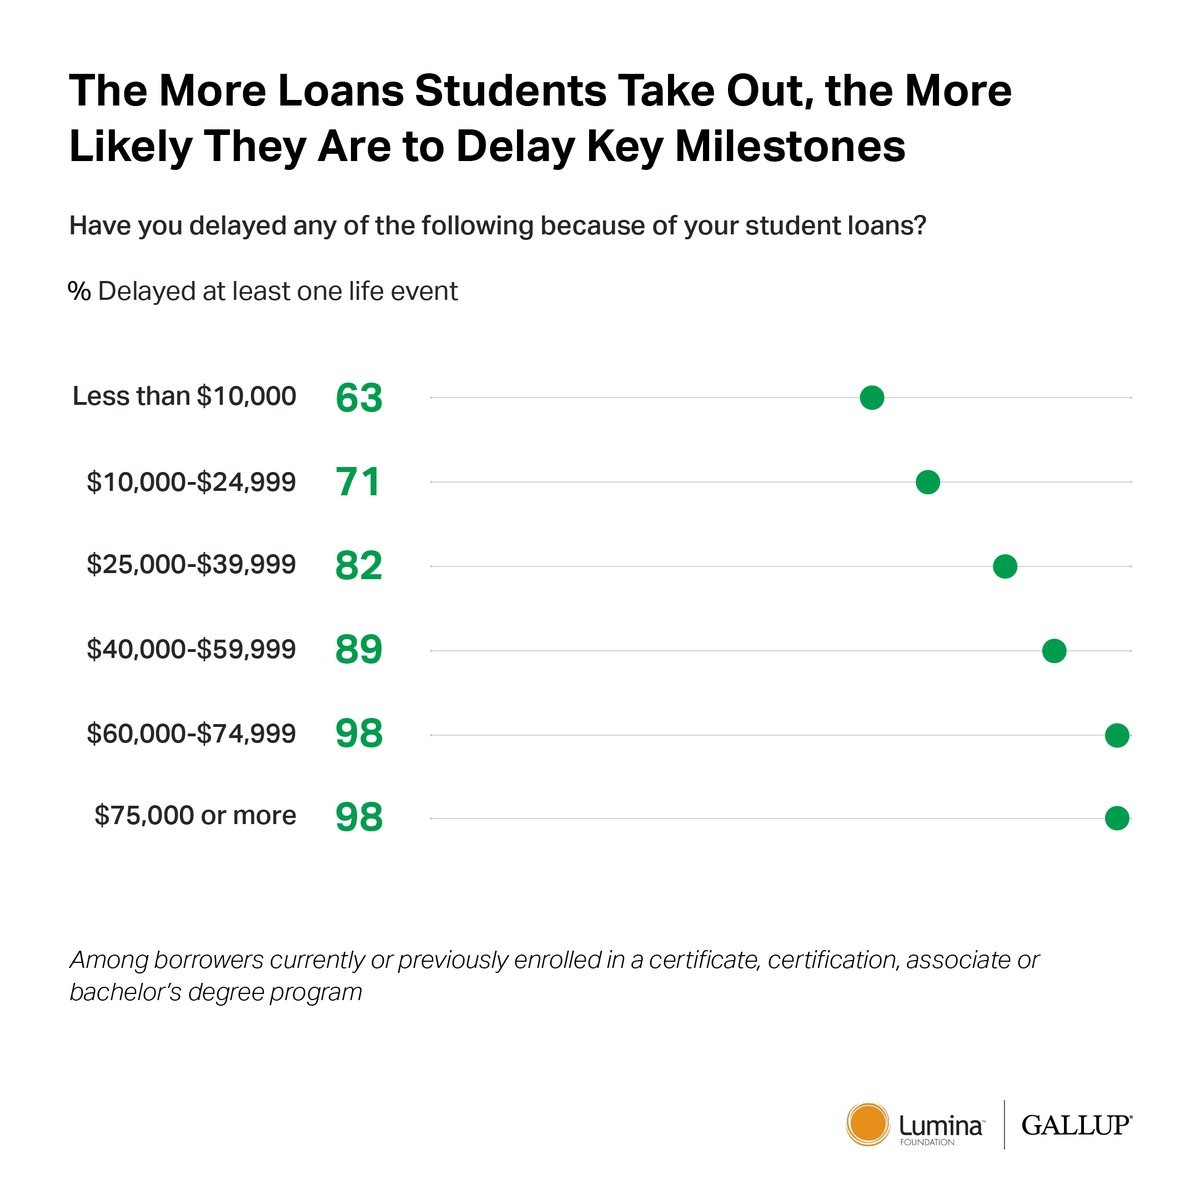 Seventy-one percent of currently and previously enrolled U.S. adults who’ve taken out student loans report having delayed at least one significant life event due to their loan debt. Discover what we learned with @LuminaFound. on.gallup.com/3JfNFnr